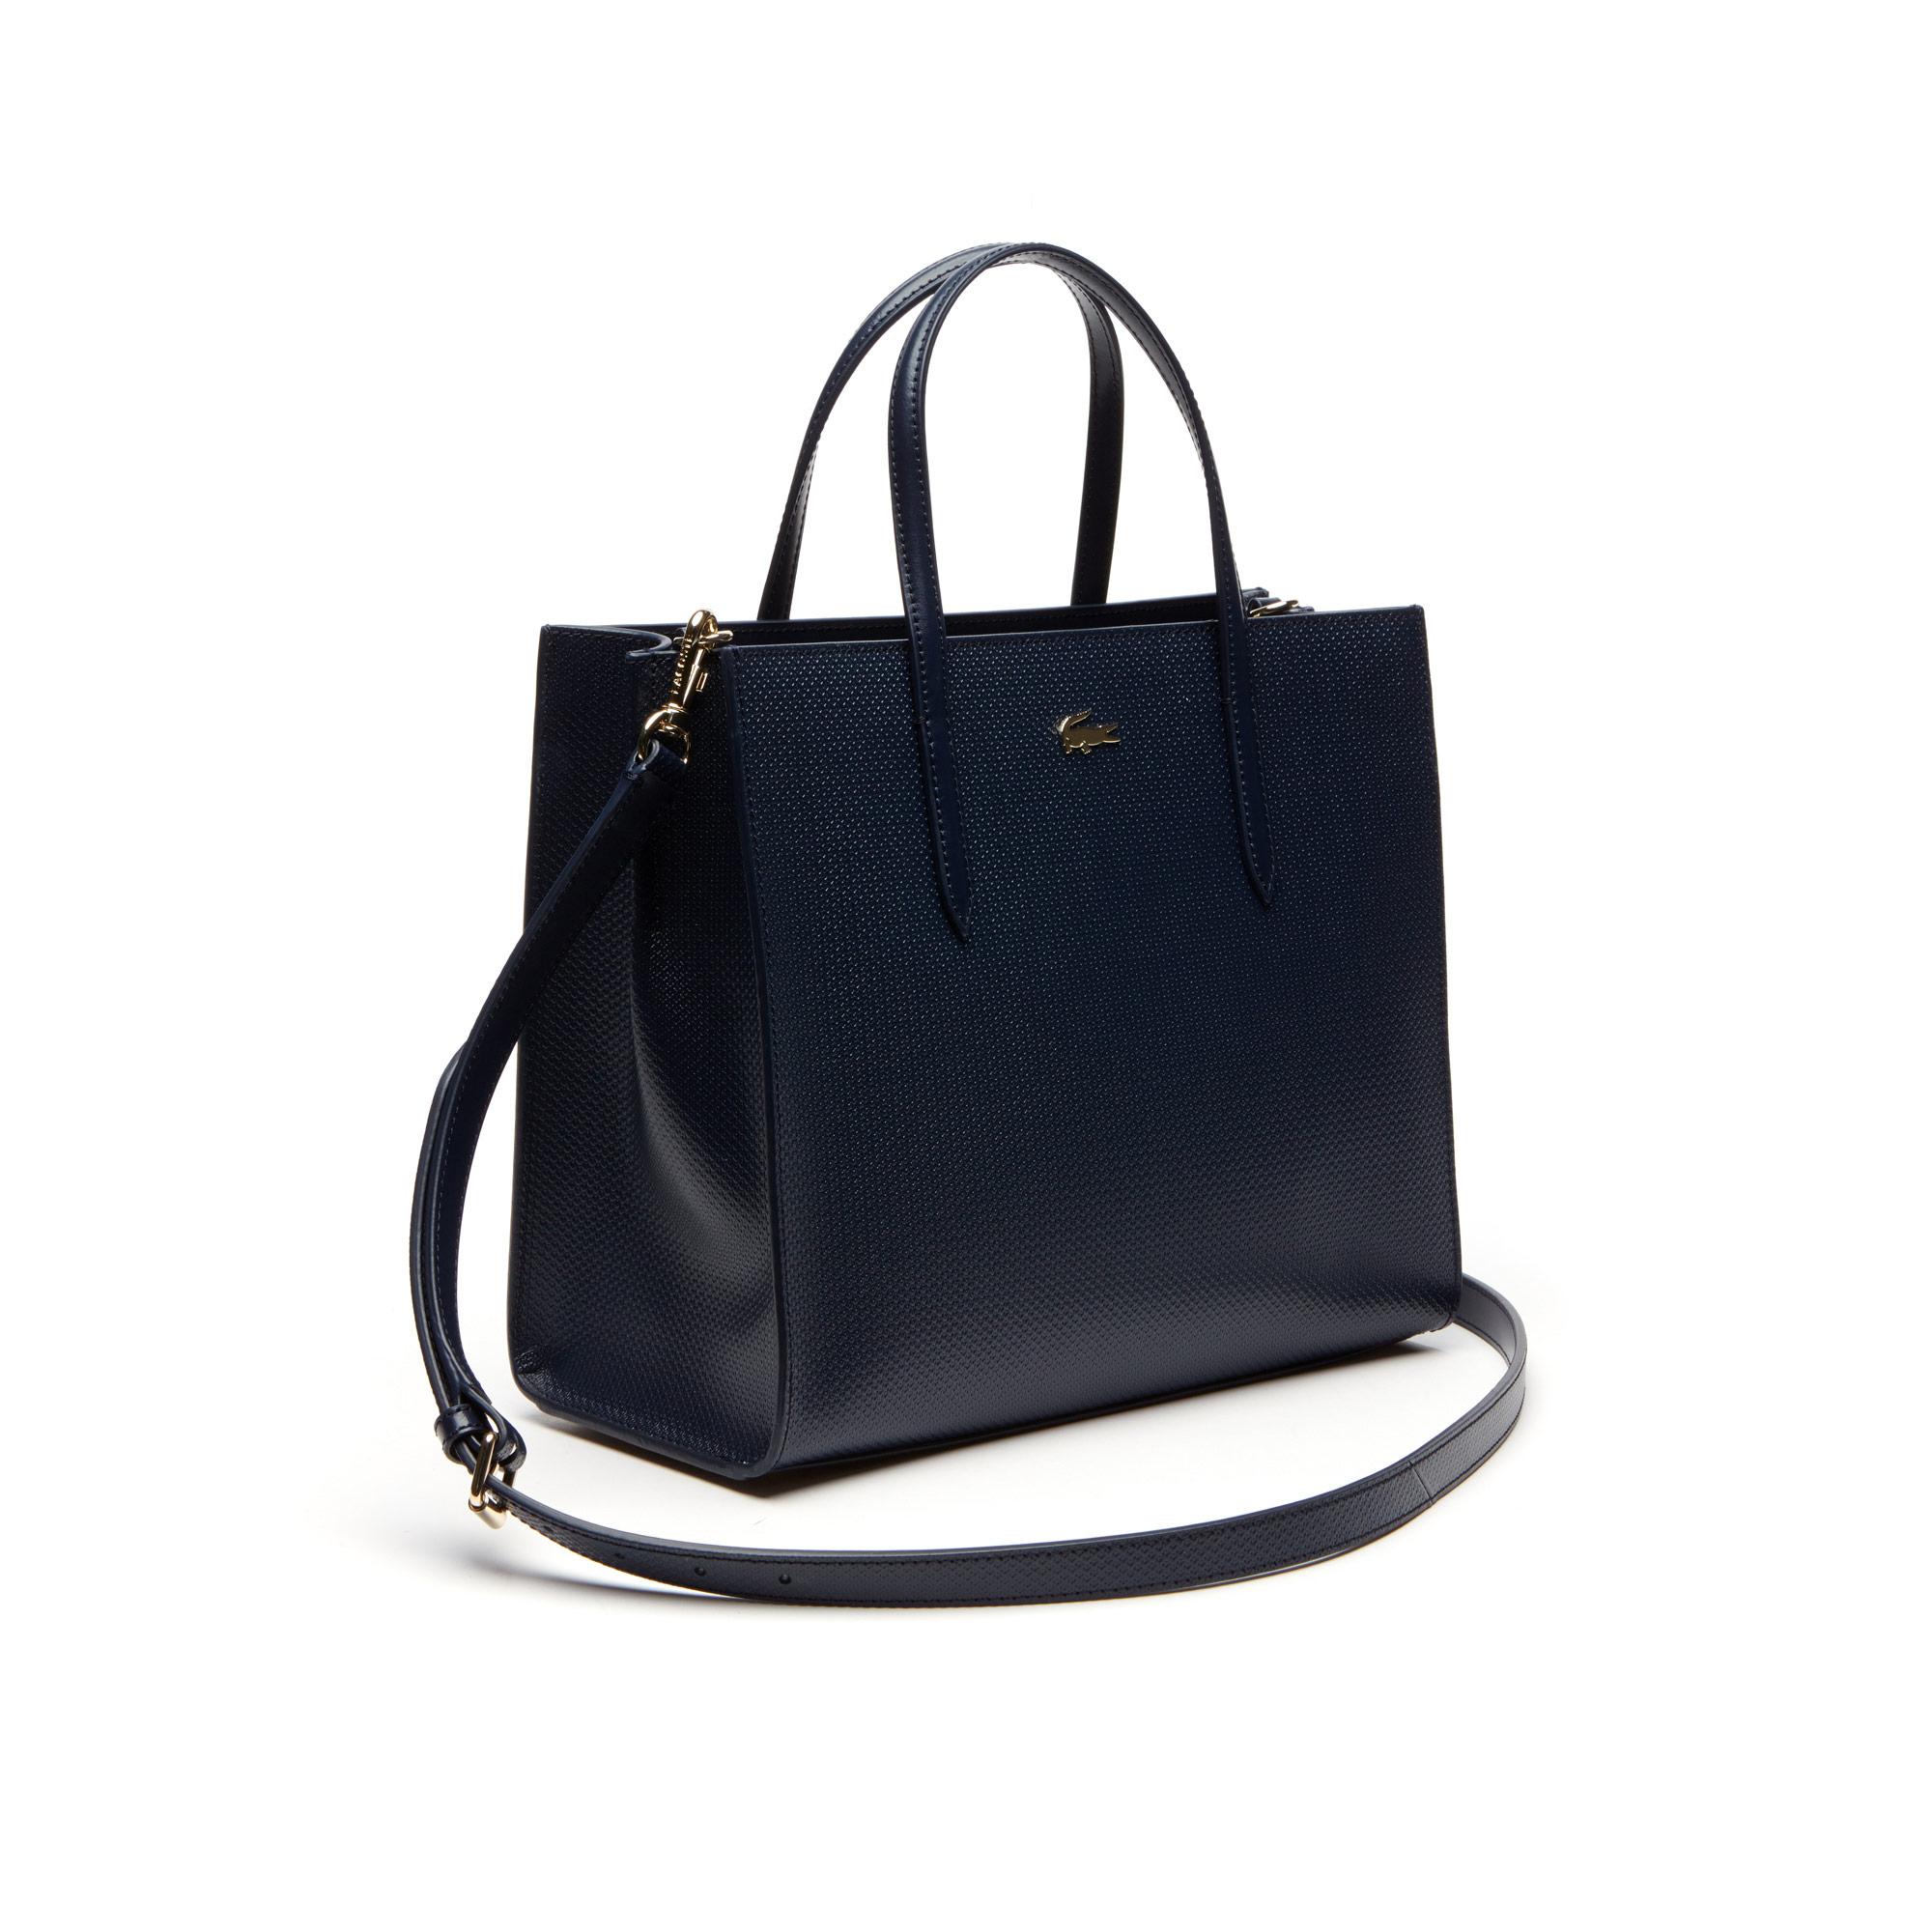 Lacoste bags for women